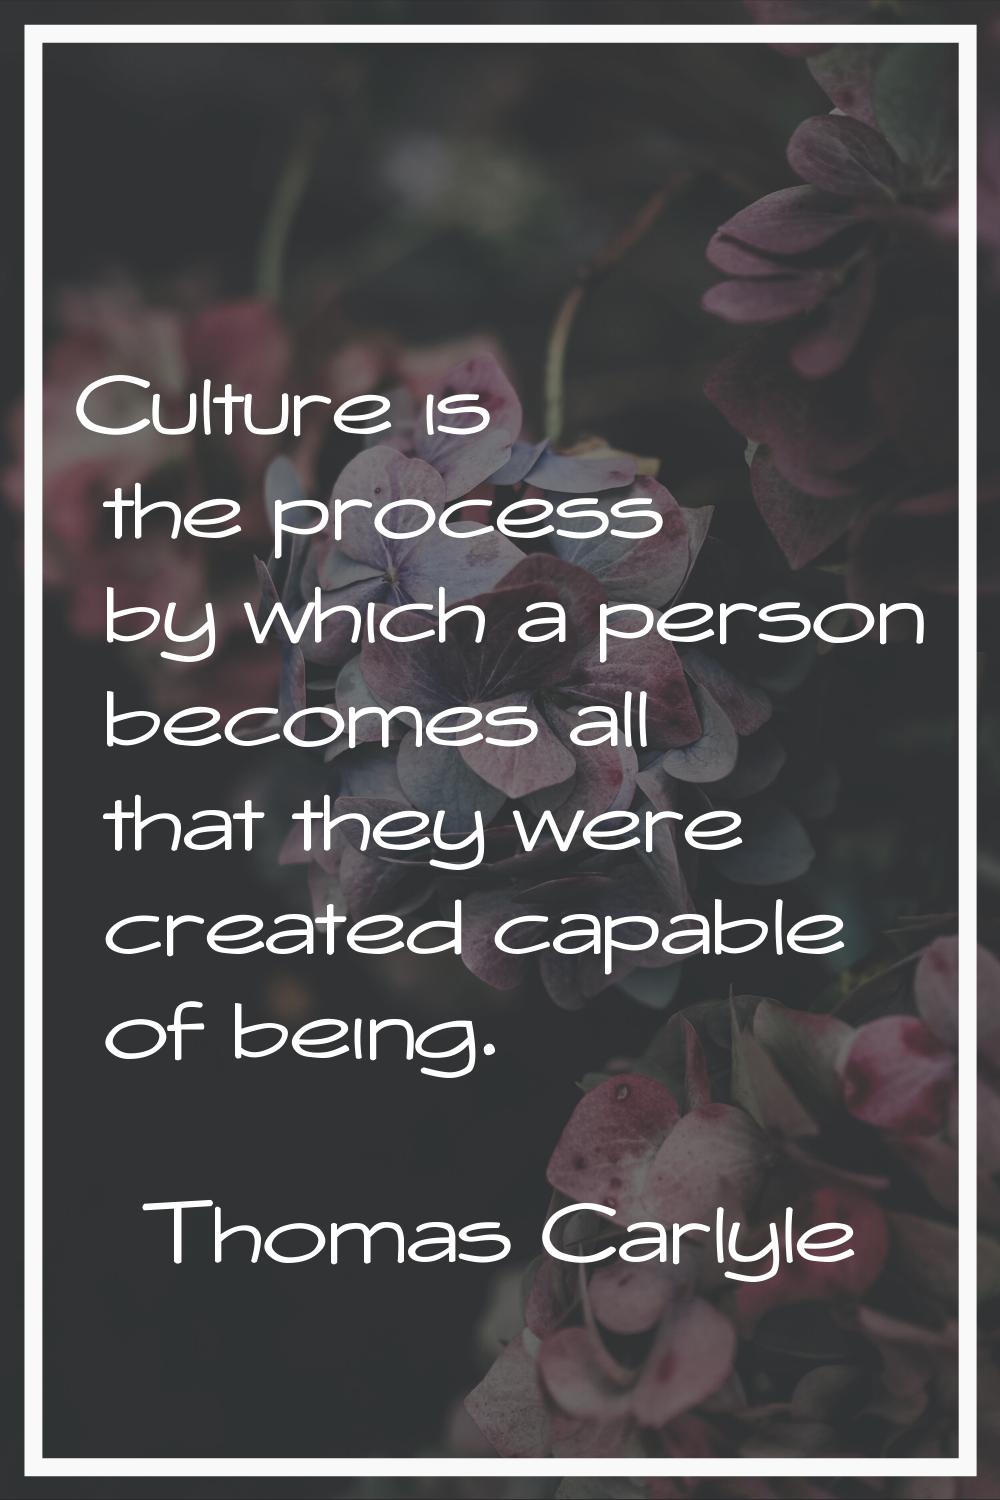 Culture is the process by which a person becomes all that they were created capable of being.